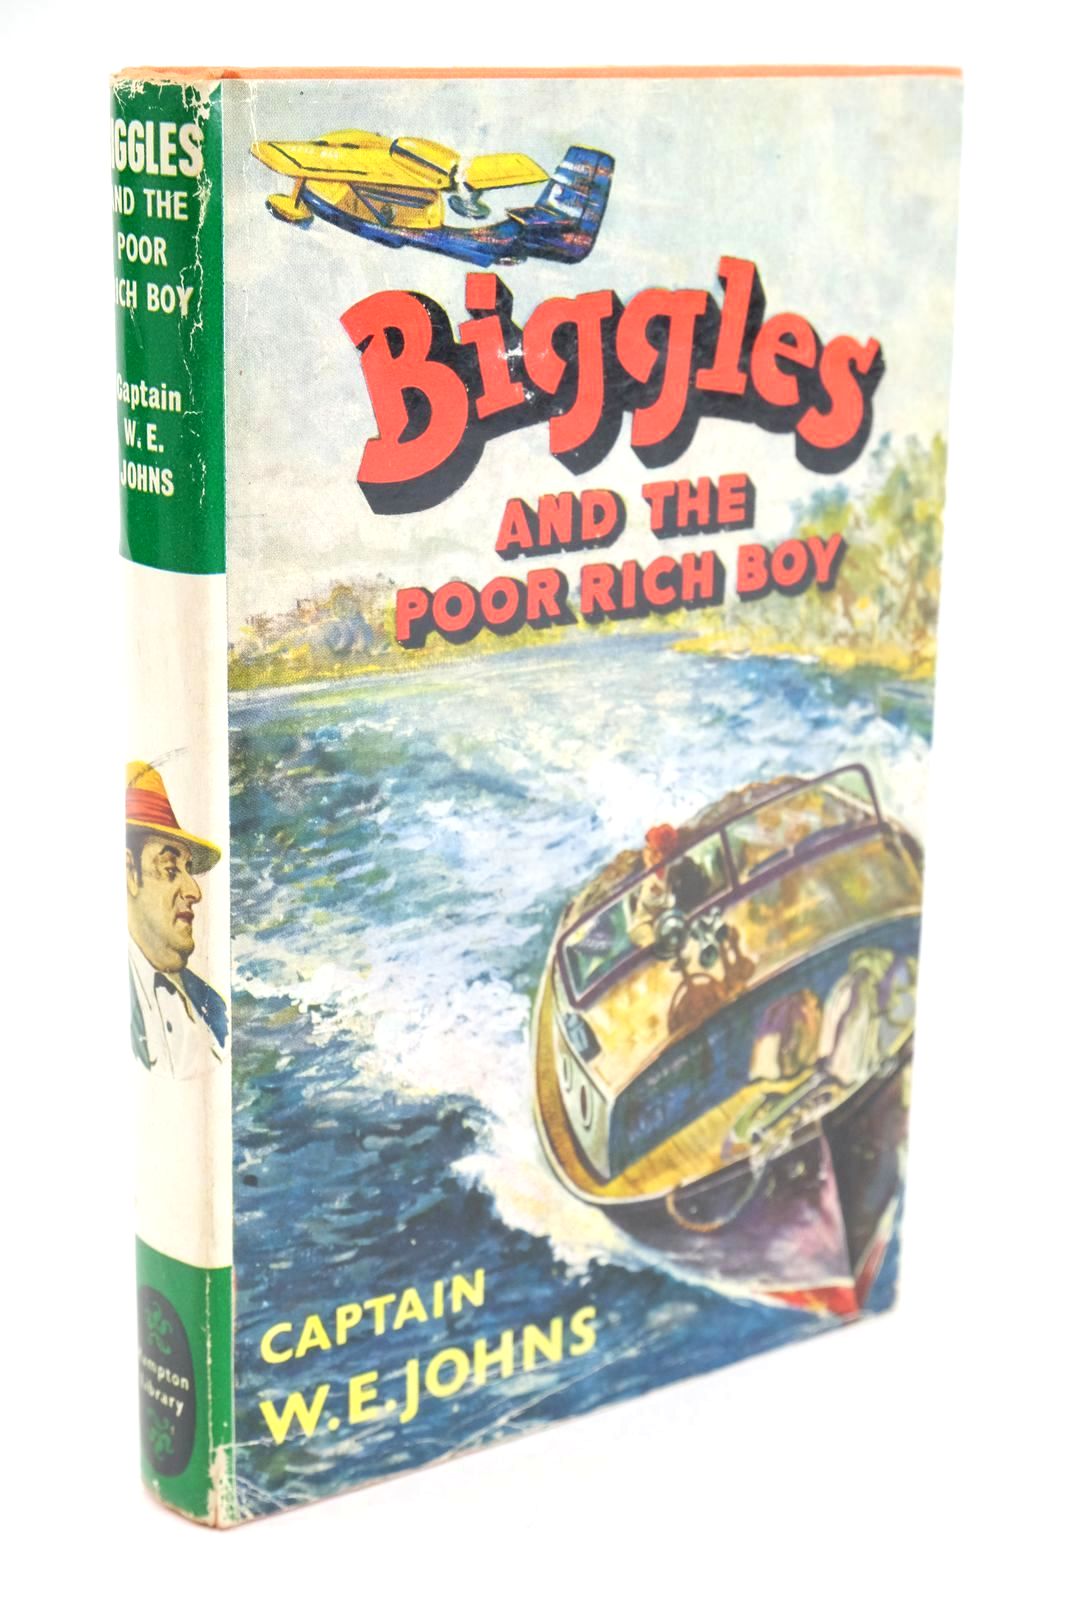 Photo of BIGGLES AND THE POOR RICH BOY written by Johns, W.E. illustrated by Stead, Leslie published by Brockhampton Press Ltd. (STOCK CODE: 1324856)  for sale by Stella & Rose's Books